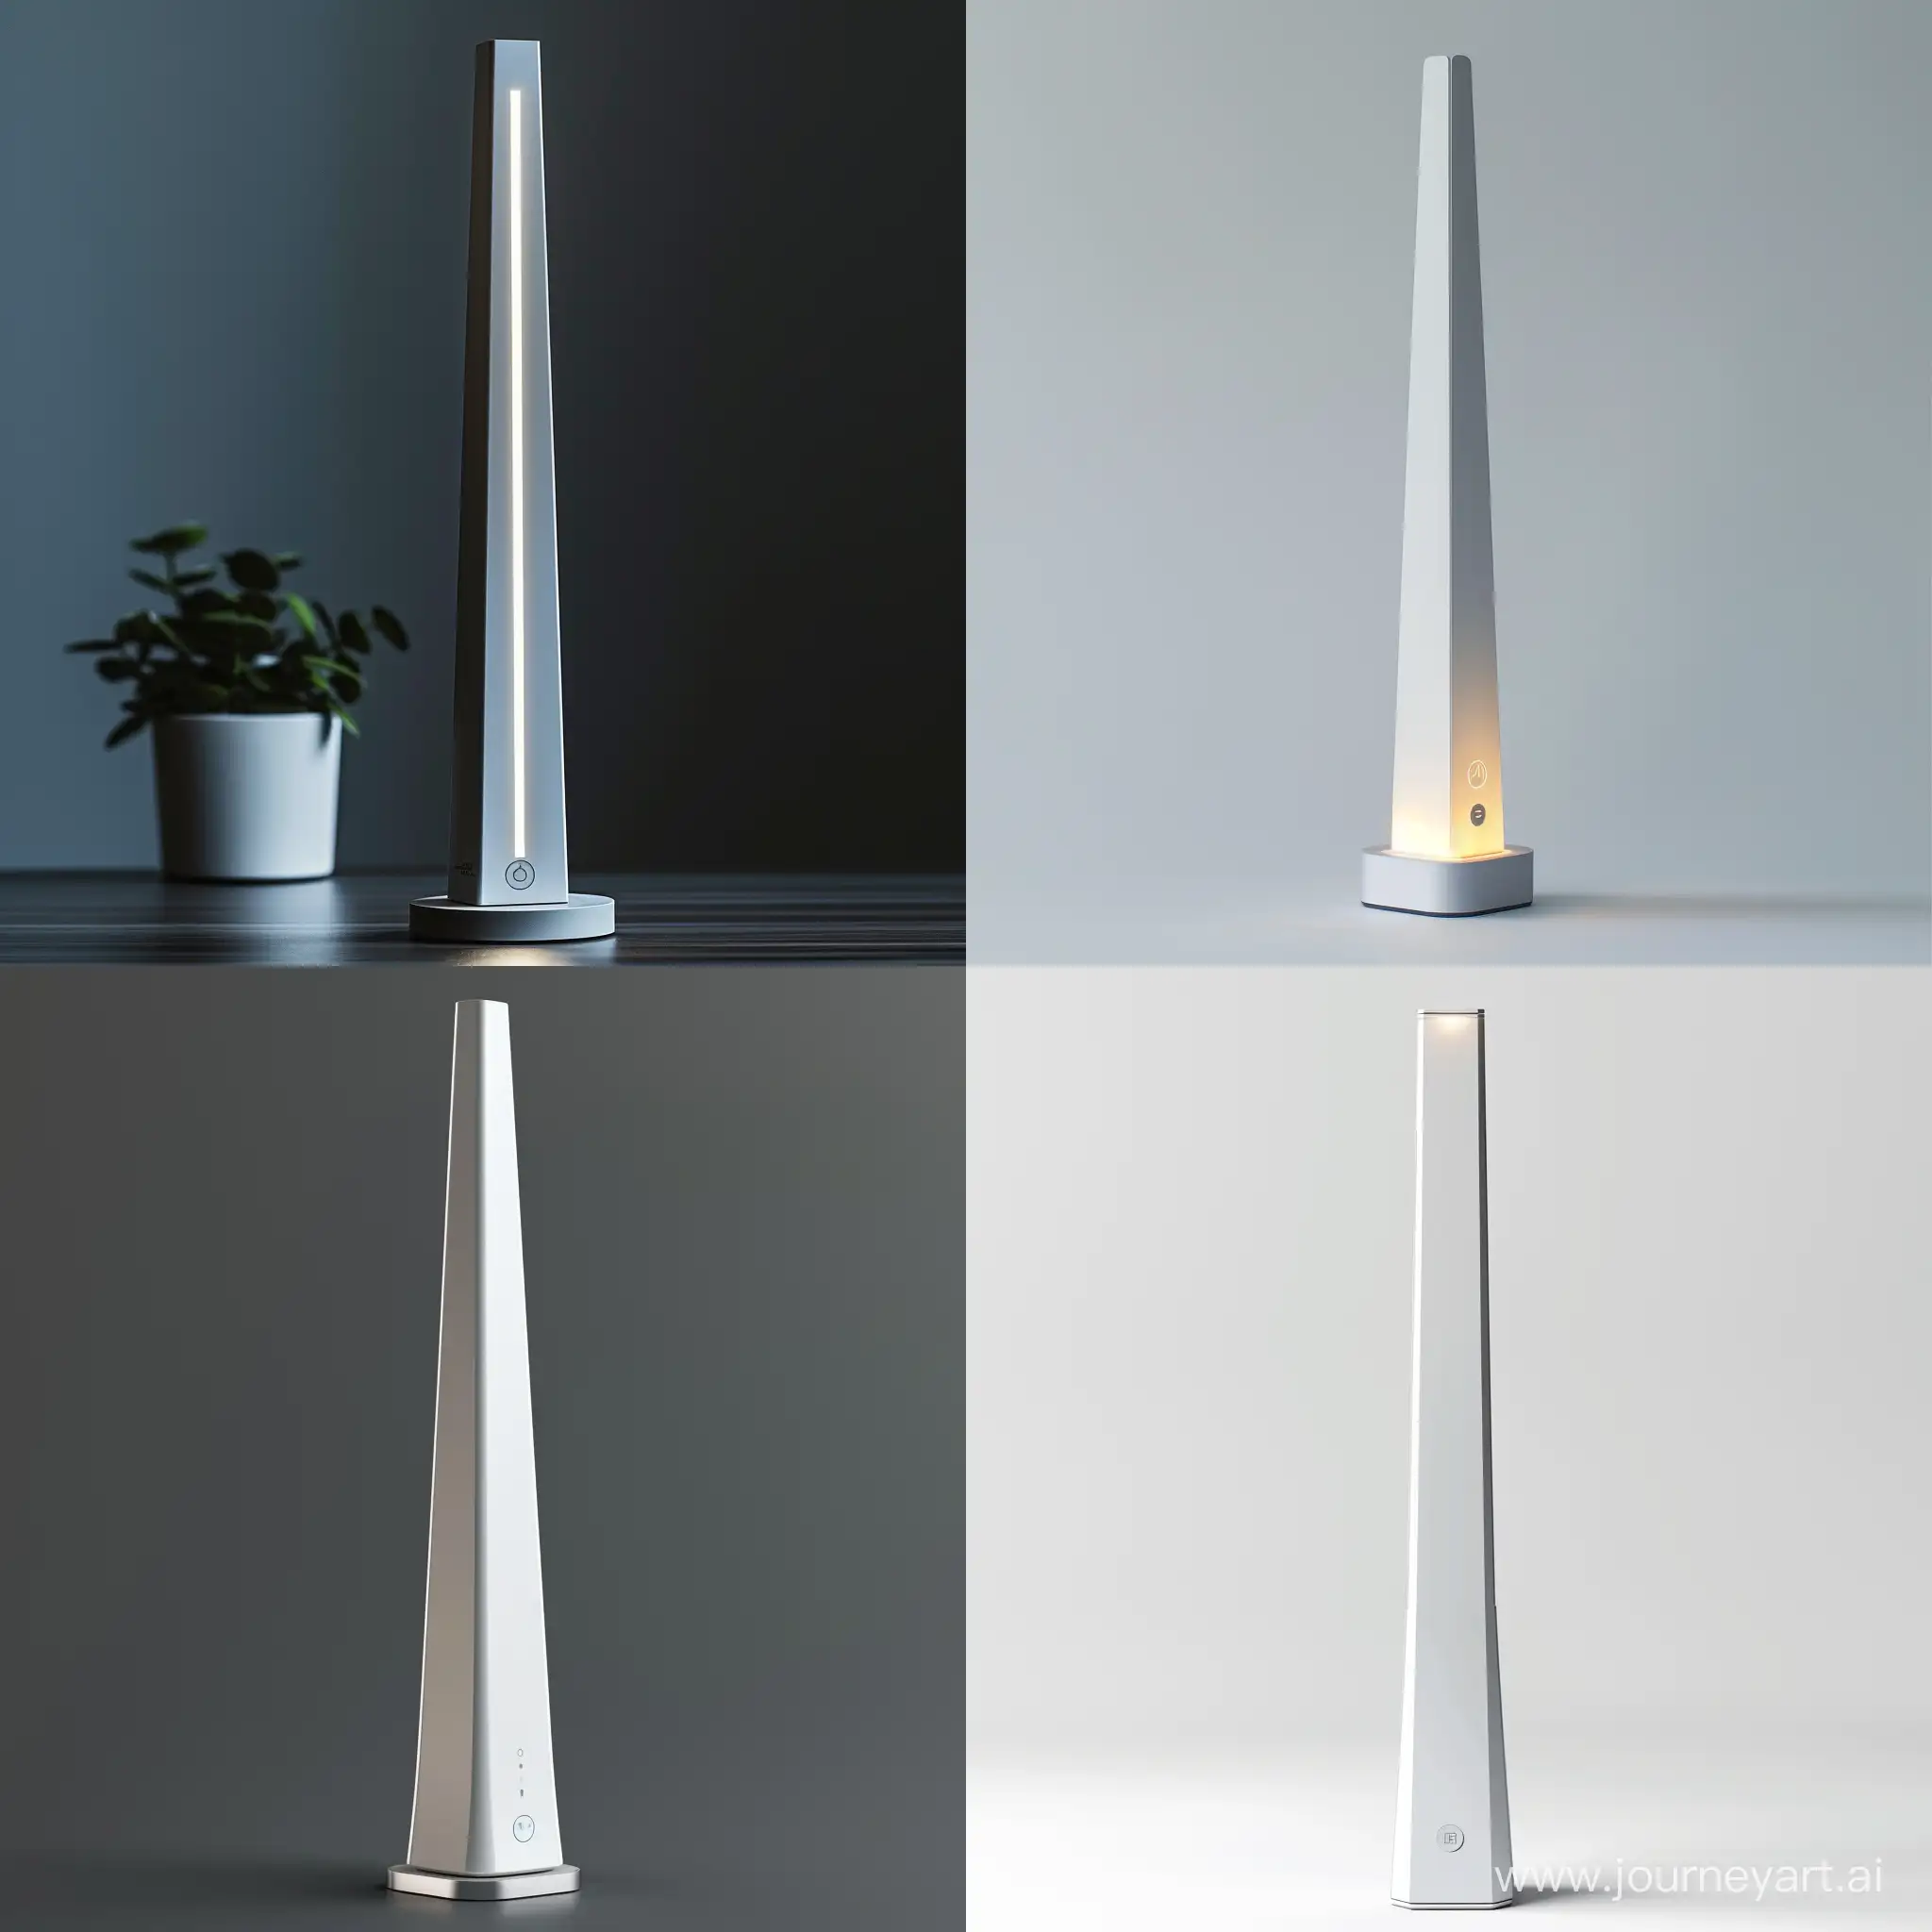 "Imagine  a slender, stand-alone energy gateway with a slight taper towards the top, inspired by Japanese minimalism. The base is made of sustainable aluminium, while the body is constructed from recycled plastics, finished in white or light gray. Standing 30 cm tall with a base diameter of 8 cm, this device features soft LED lighting for notifications and a laser-engraved logo on the aluminium base. It serves as a central hub for smart home devices, simplifying energy management with a touch of Zen-inspired elegance, blending seamlessly into eco-conscious homes."realistic style